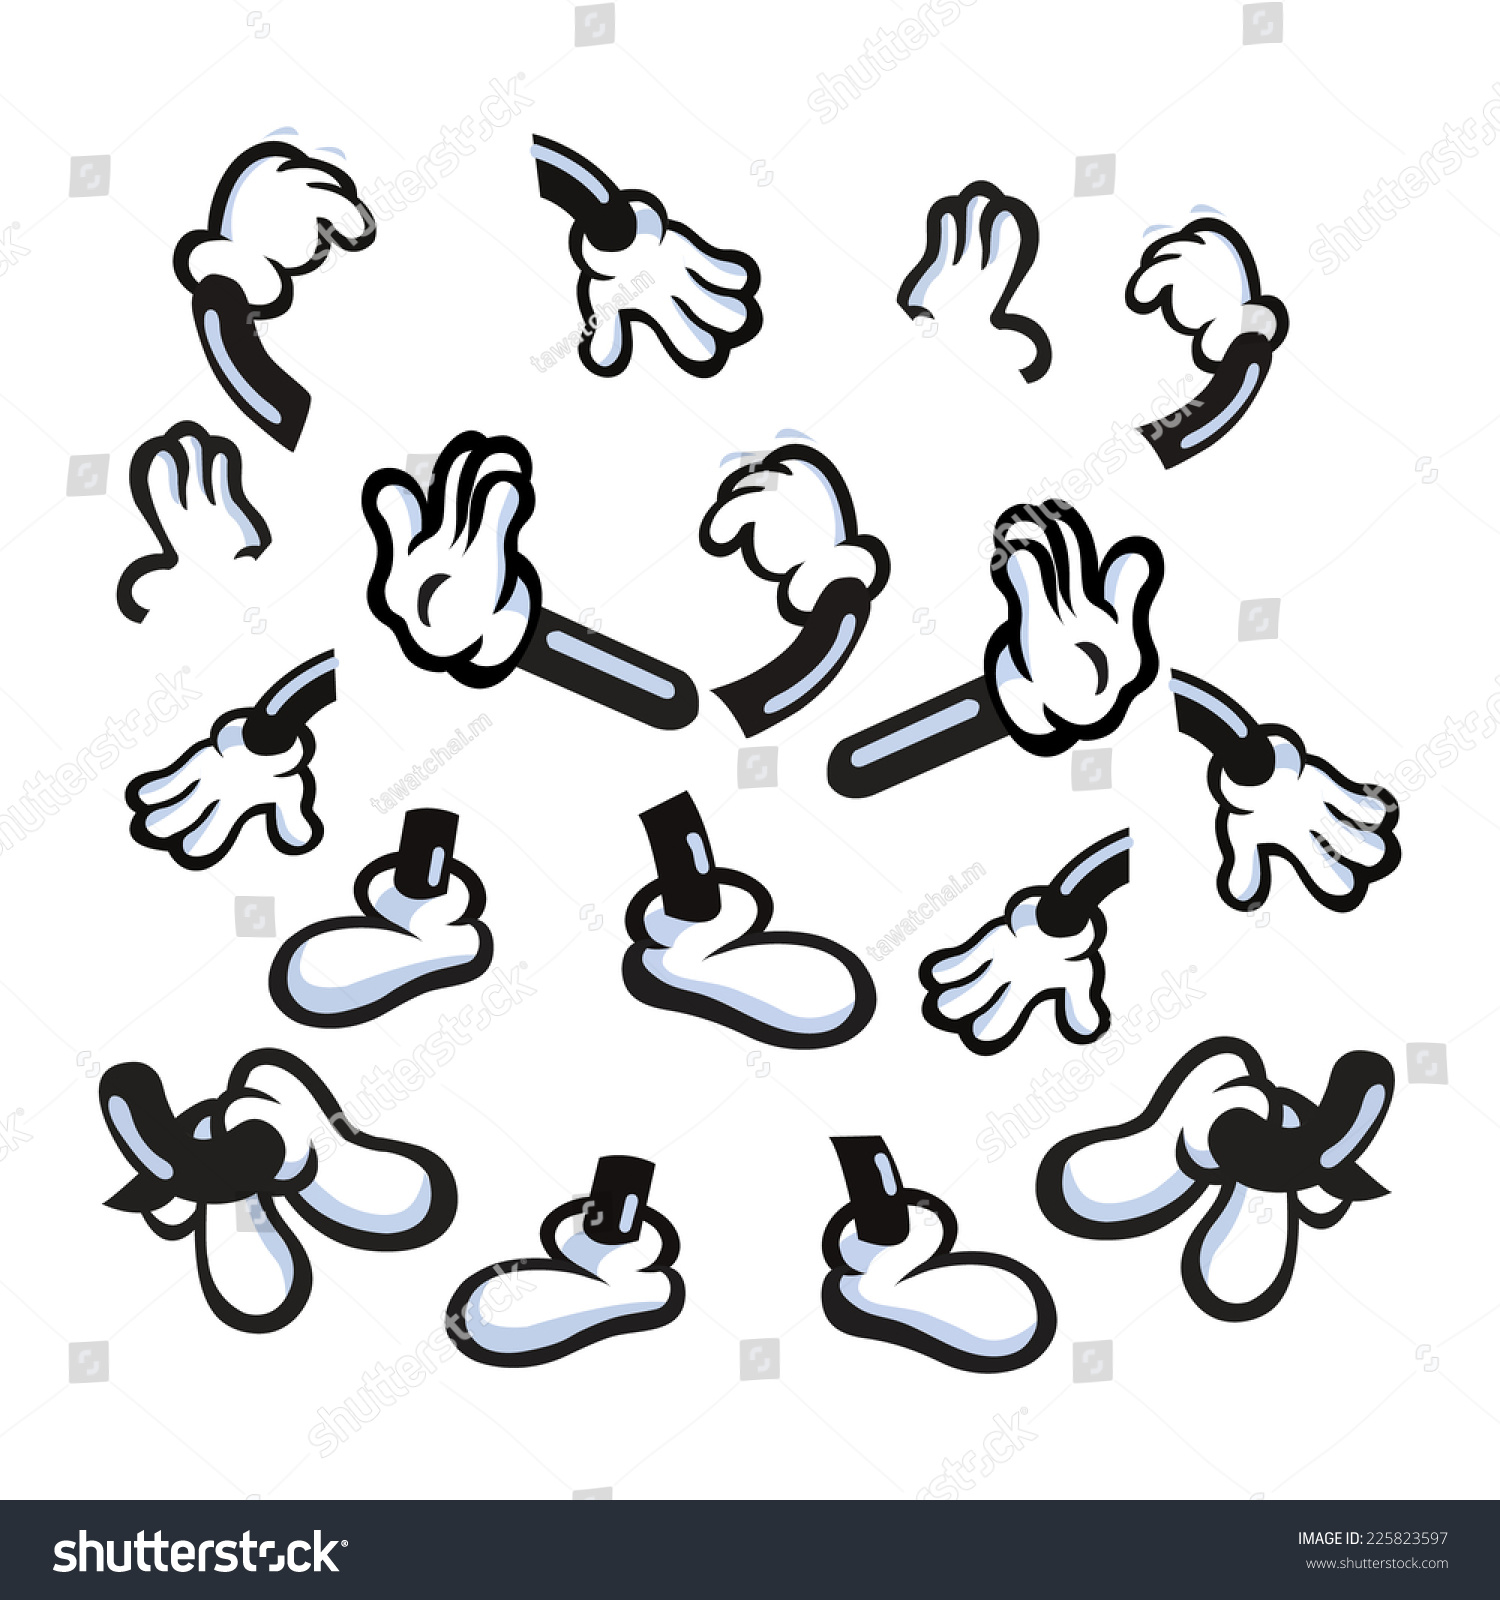 clipart arms and legs - photo #17